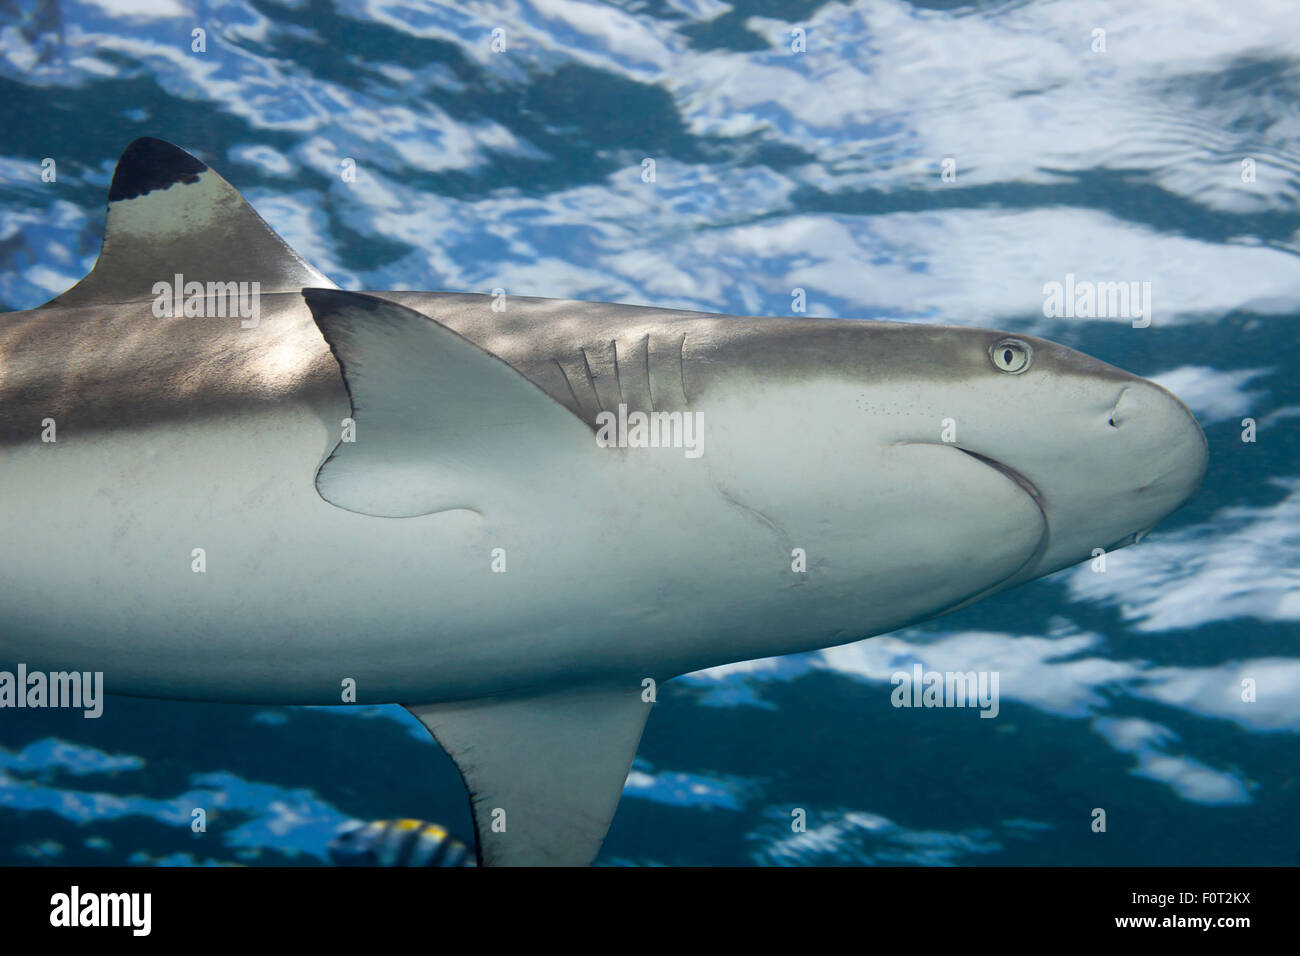 A view from below of a blacktip reef shark, Carcharhinus melanopterus, up near the surface off the island of Yap, Micronesia. Stock Photo